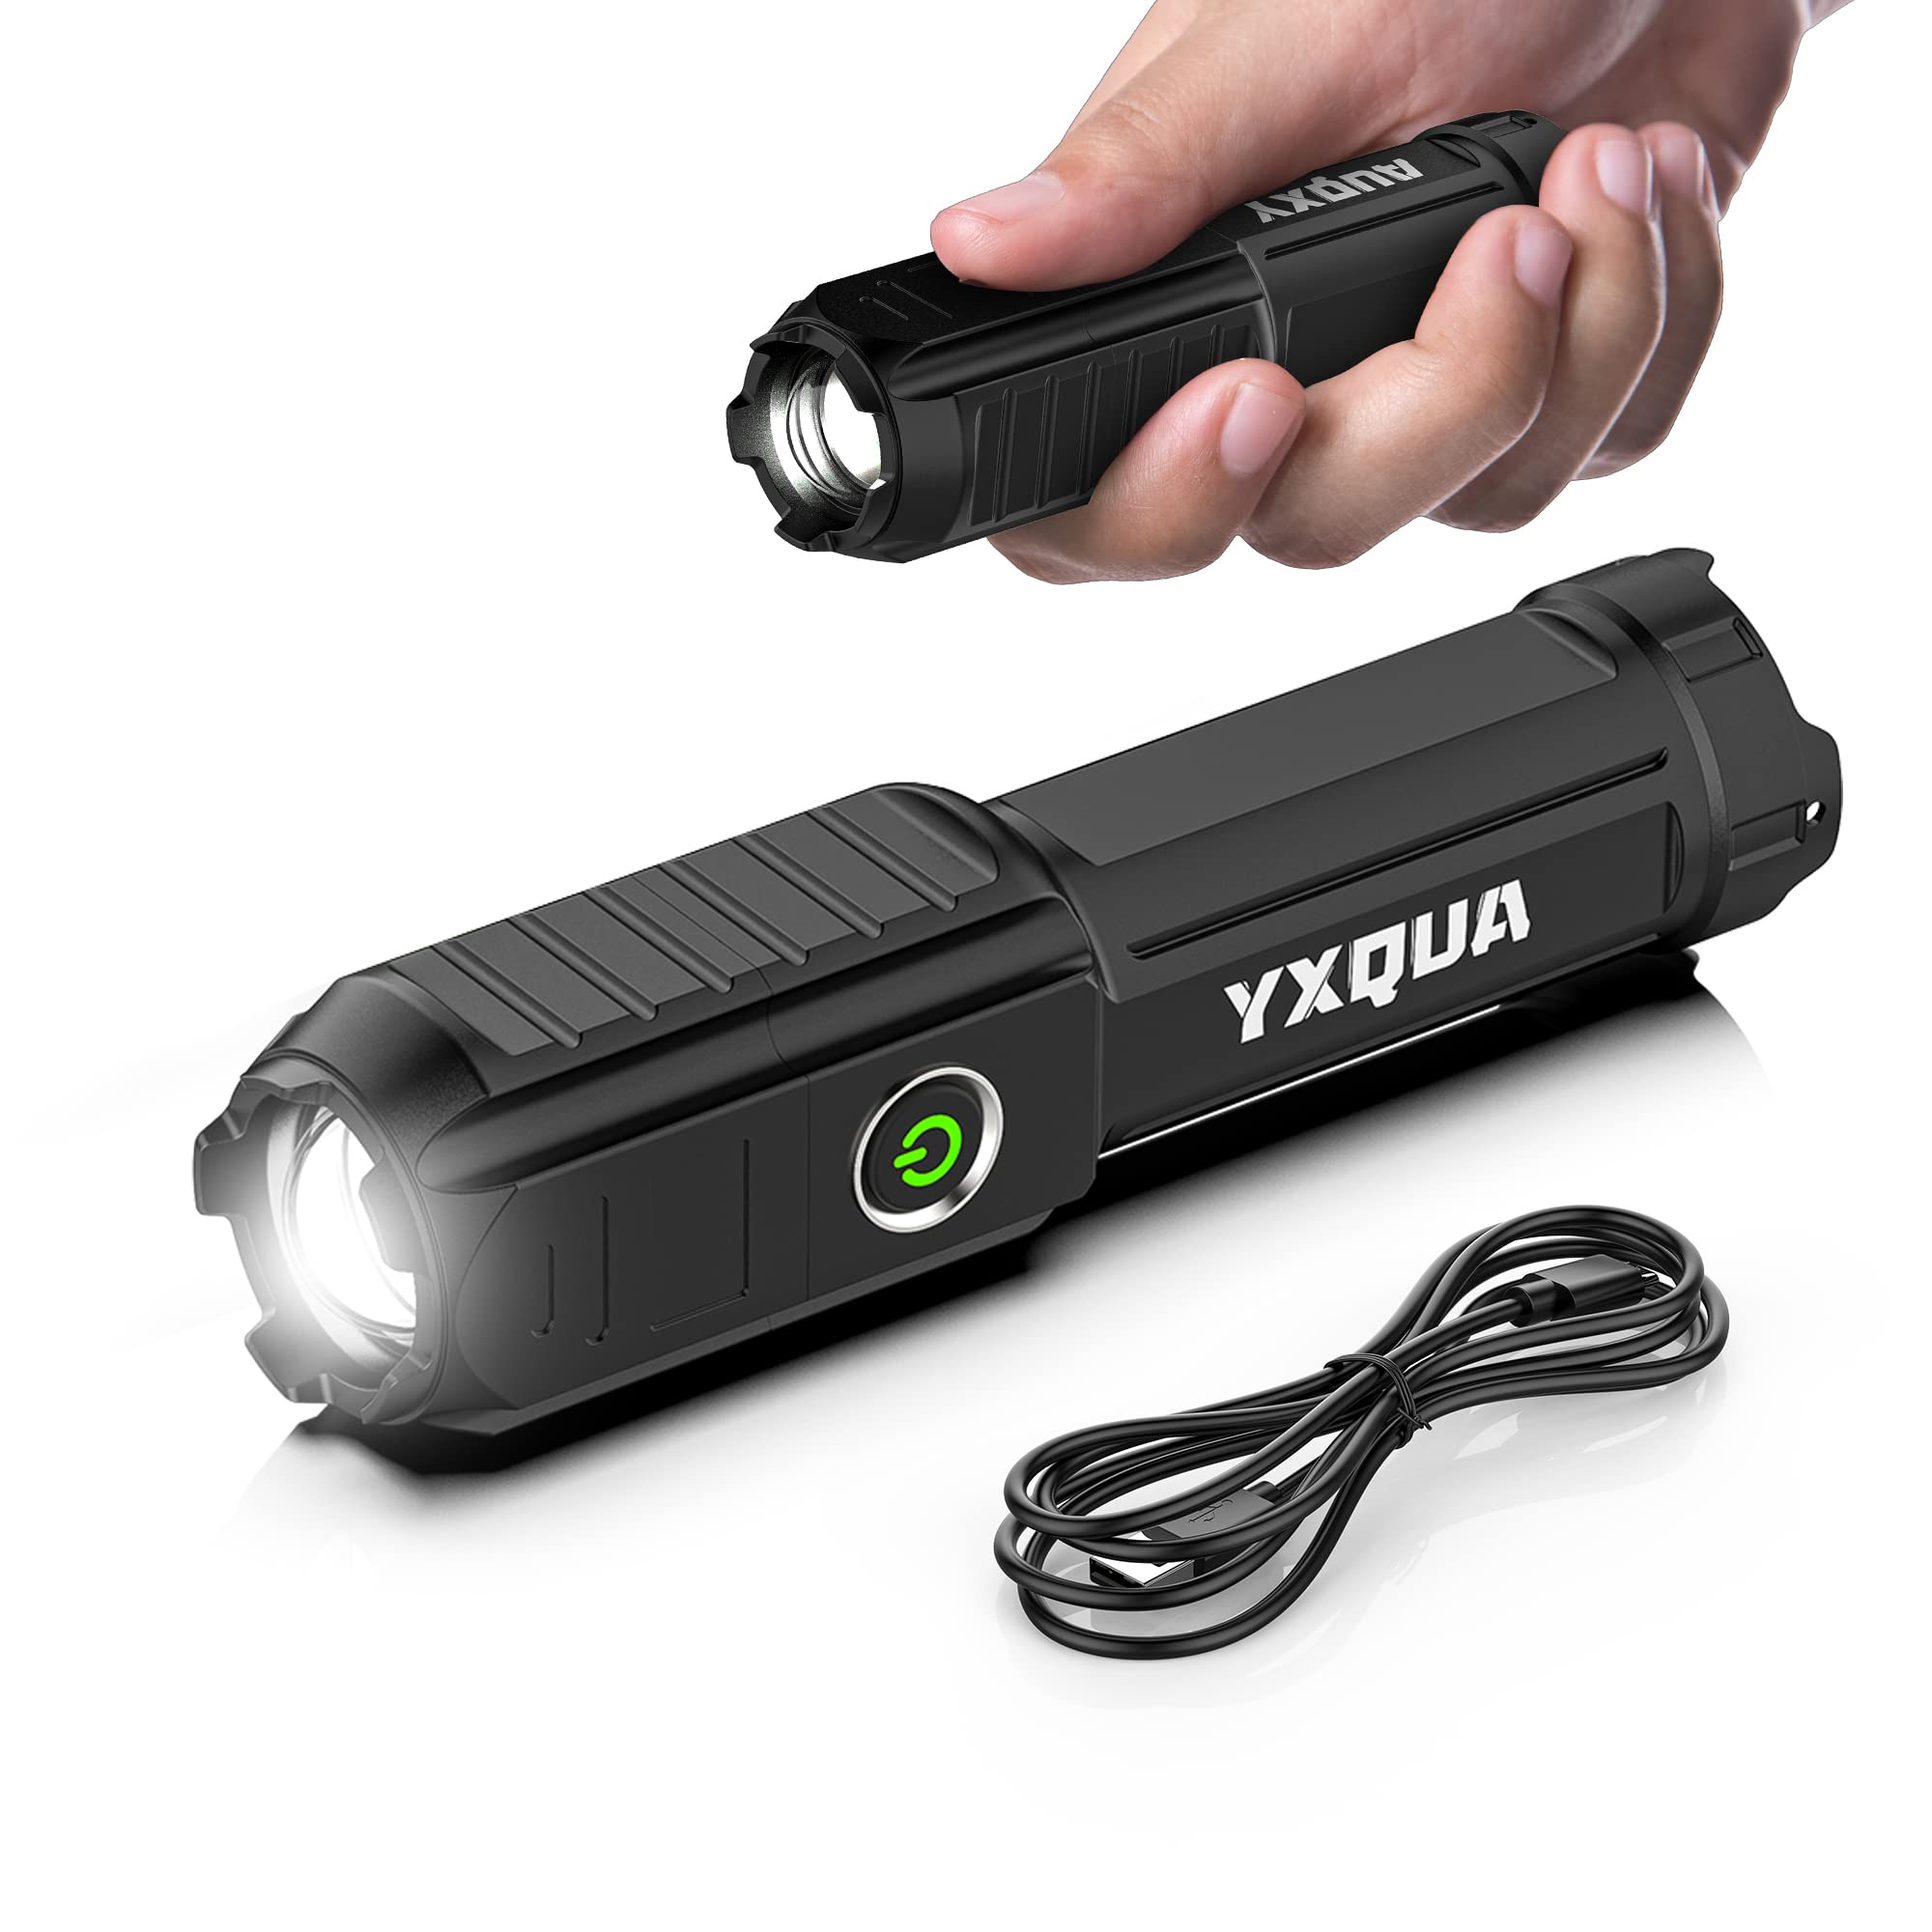 YXQUA USB Rechargeable Flashlight - Small & Bright LED Mini Flashlights, High Lumens, 4 Modes, Zoomable, The Size of Pocket Gifts for Kids (1 Pack)